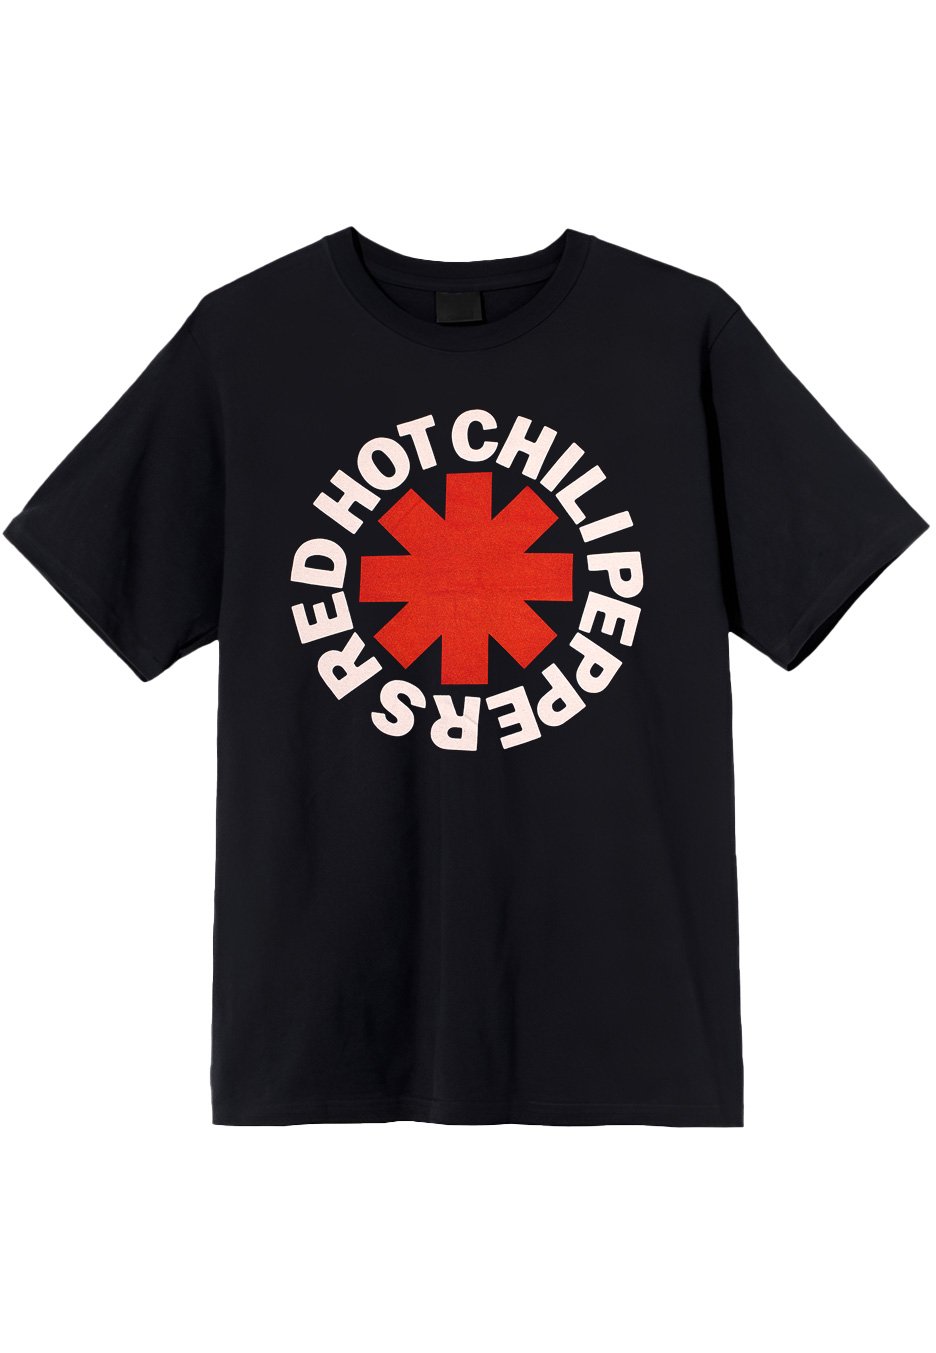 Red Hot Chili Peppers - Classic Asterisk - T-Shirt